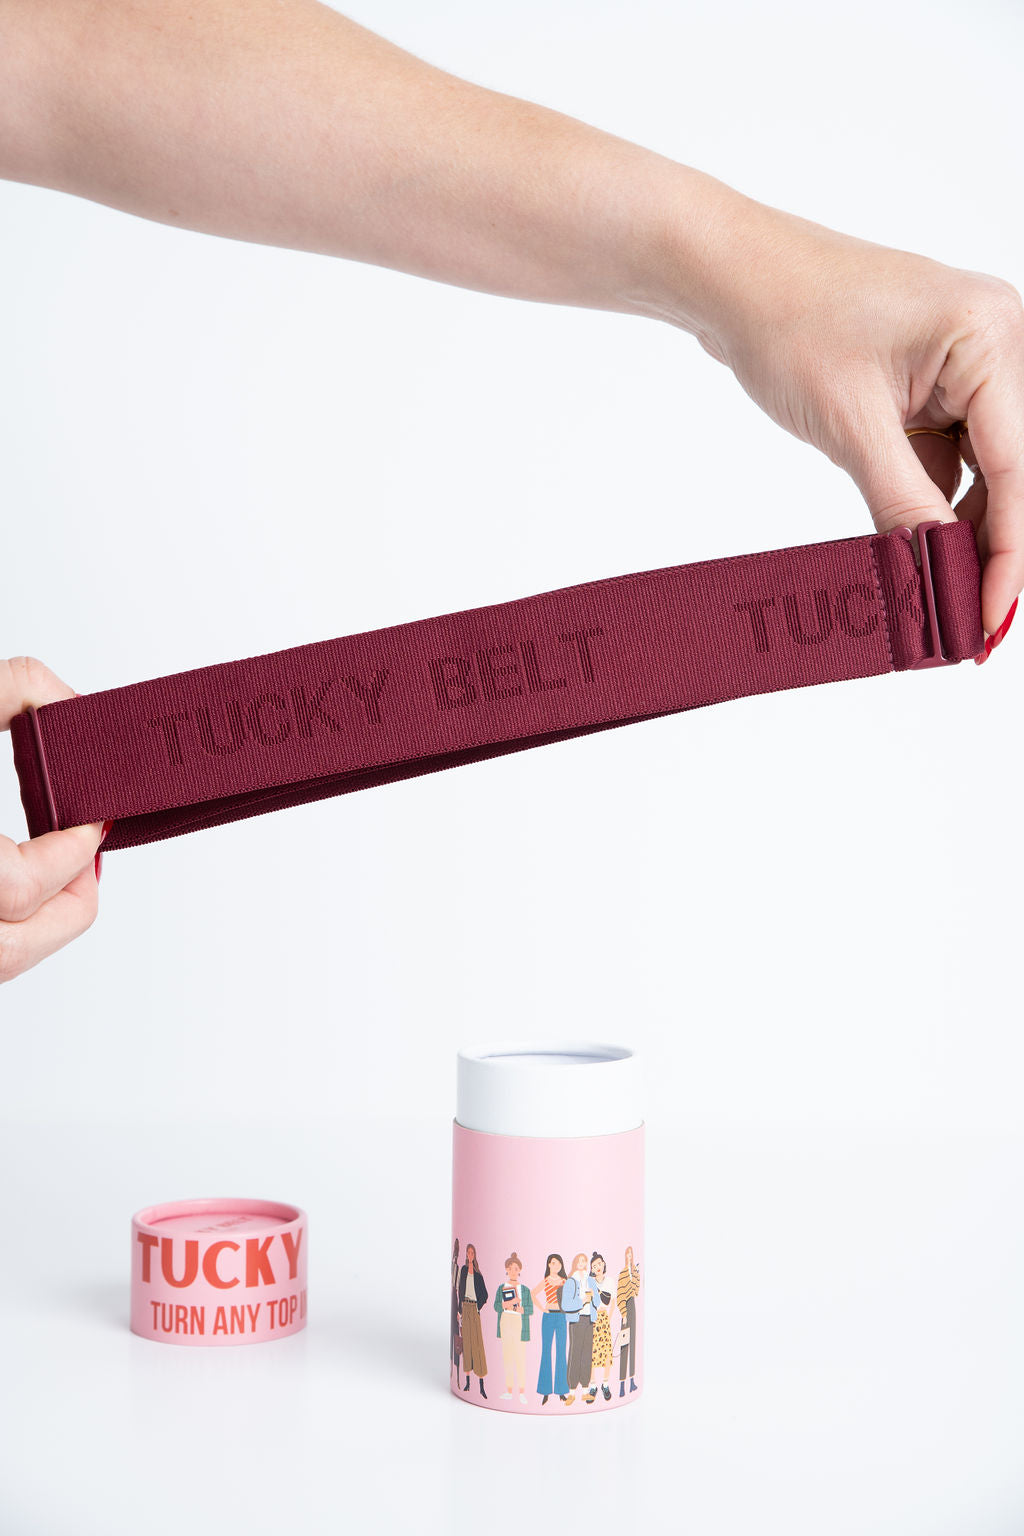 TUCKY ™️ on Instagram: There are countless ways to use your Tucky Belt,  and here are some ideas to get started. If you've ever “hacked” your way  into getting a no-bulk tuck